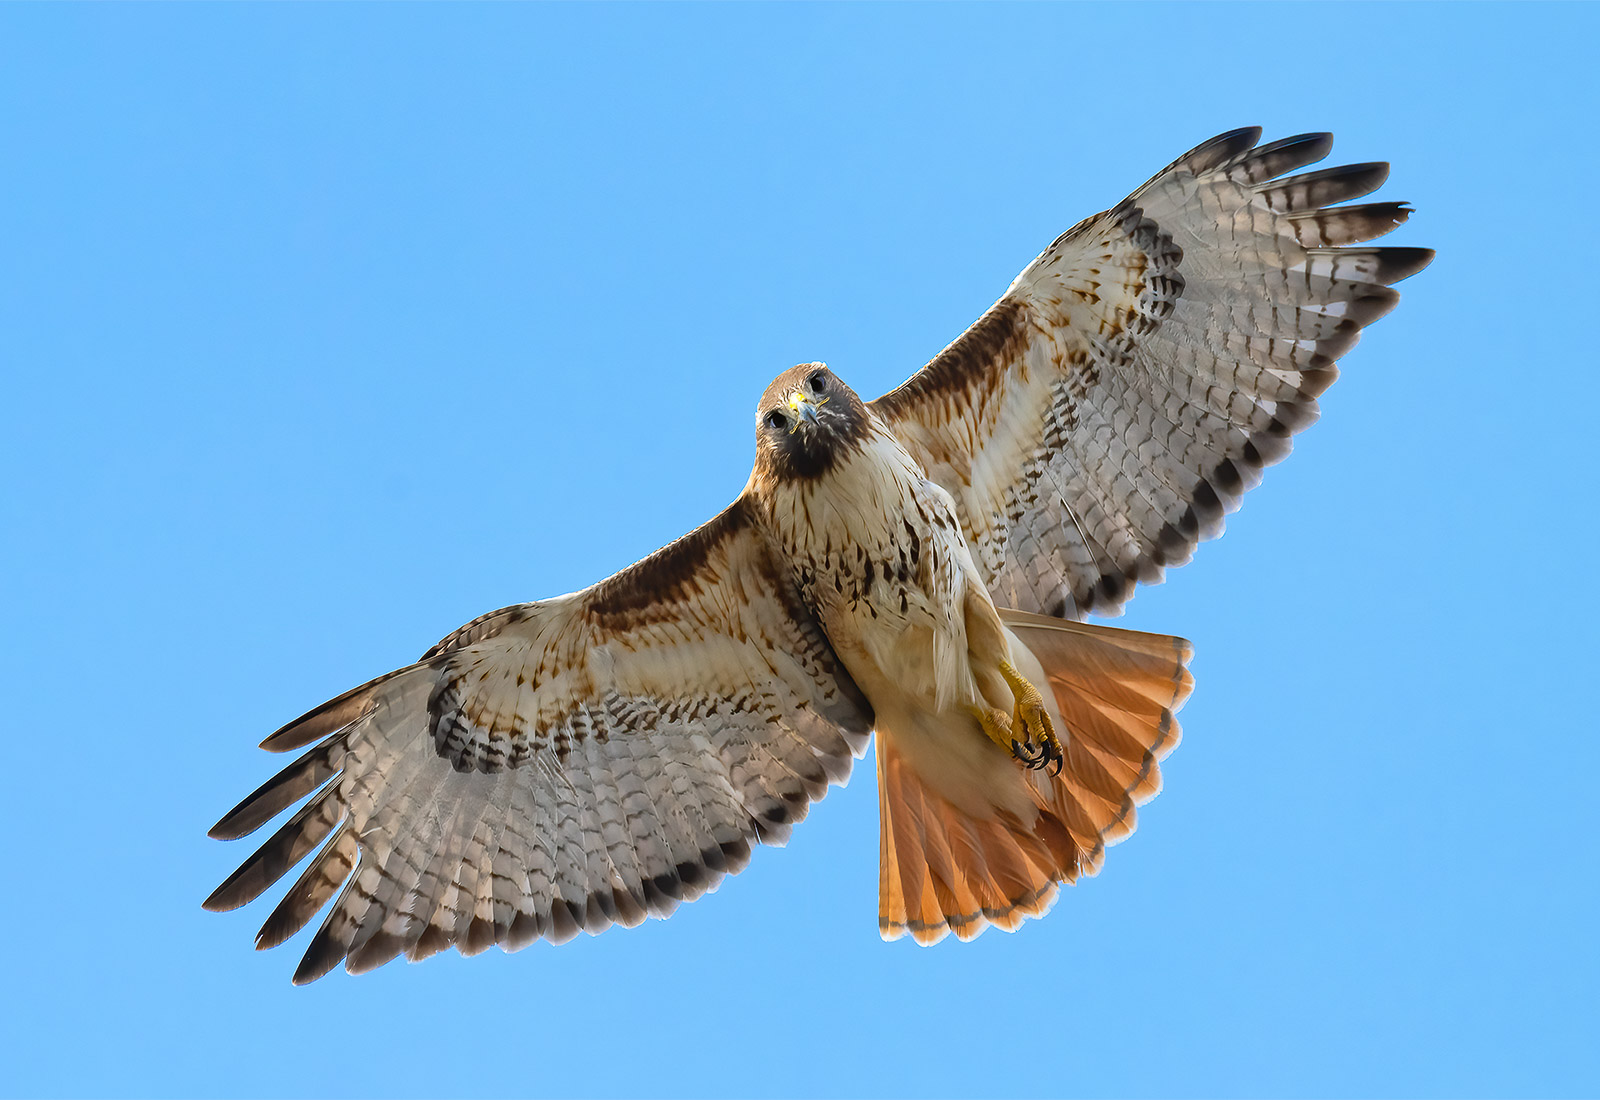 Red-tailed hawk looking down while in flight